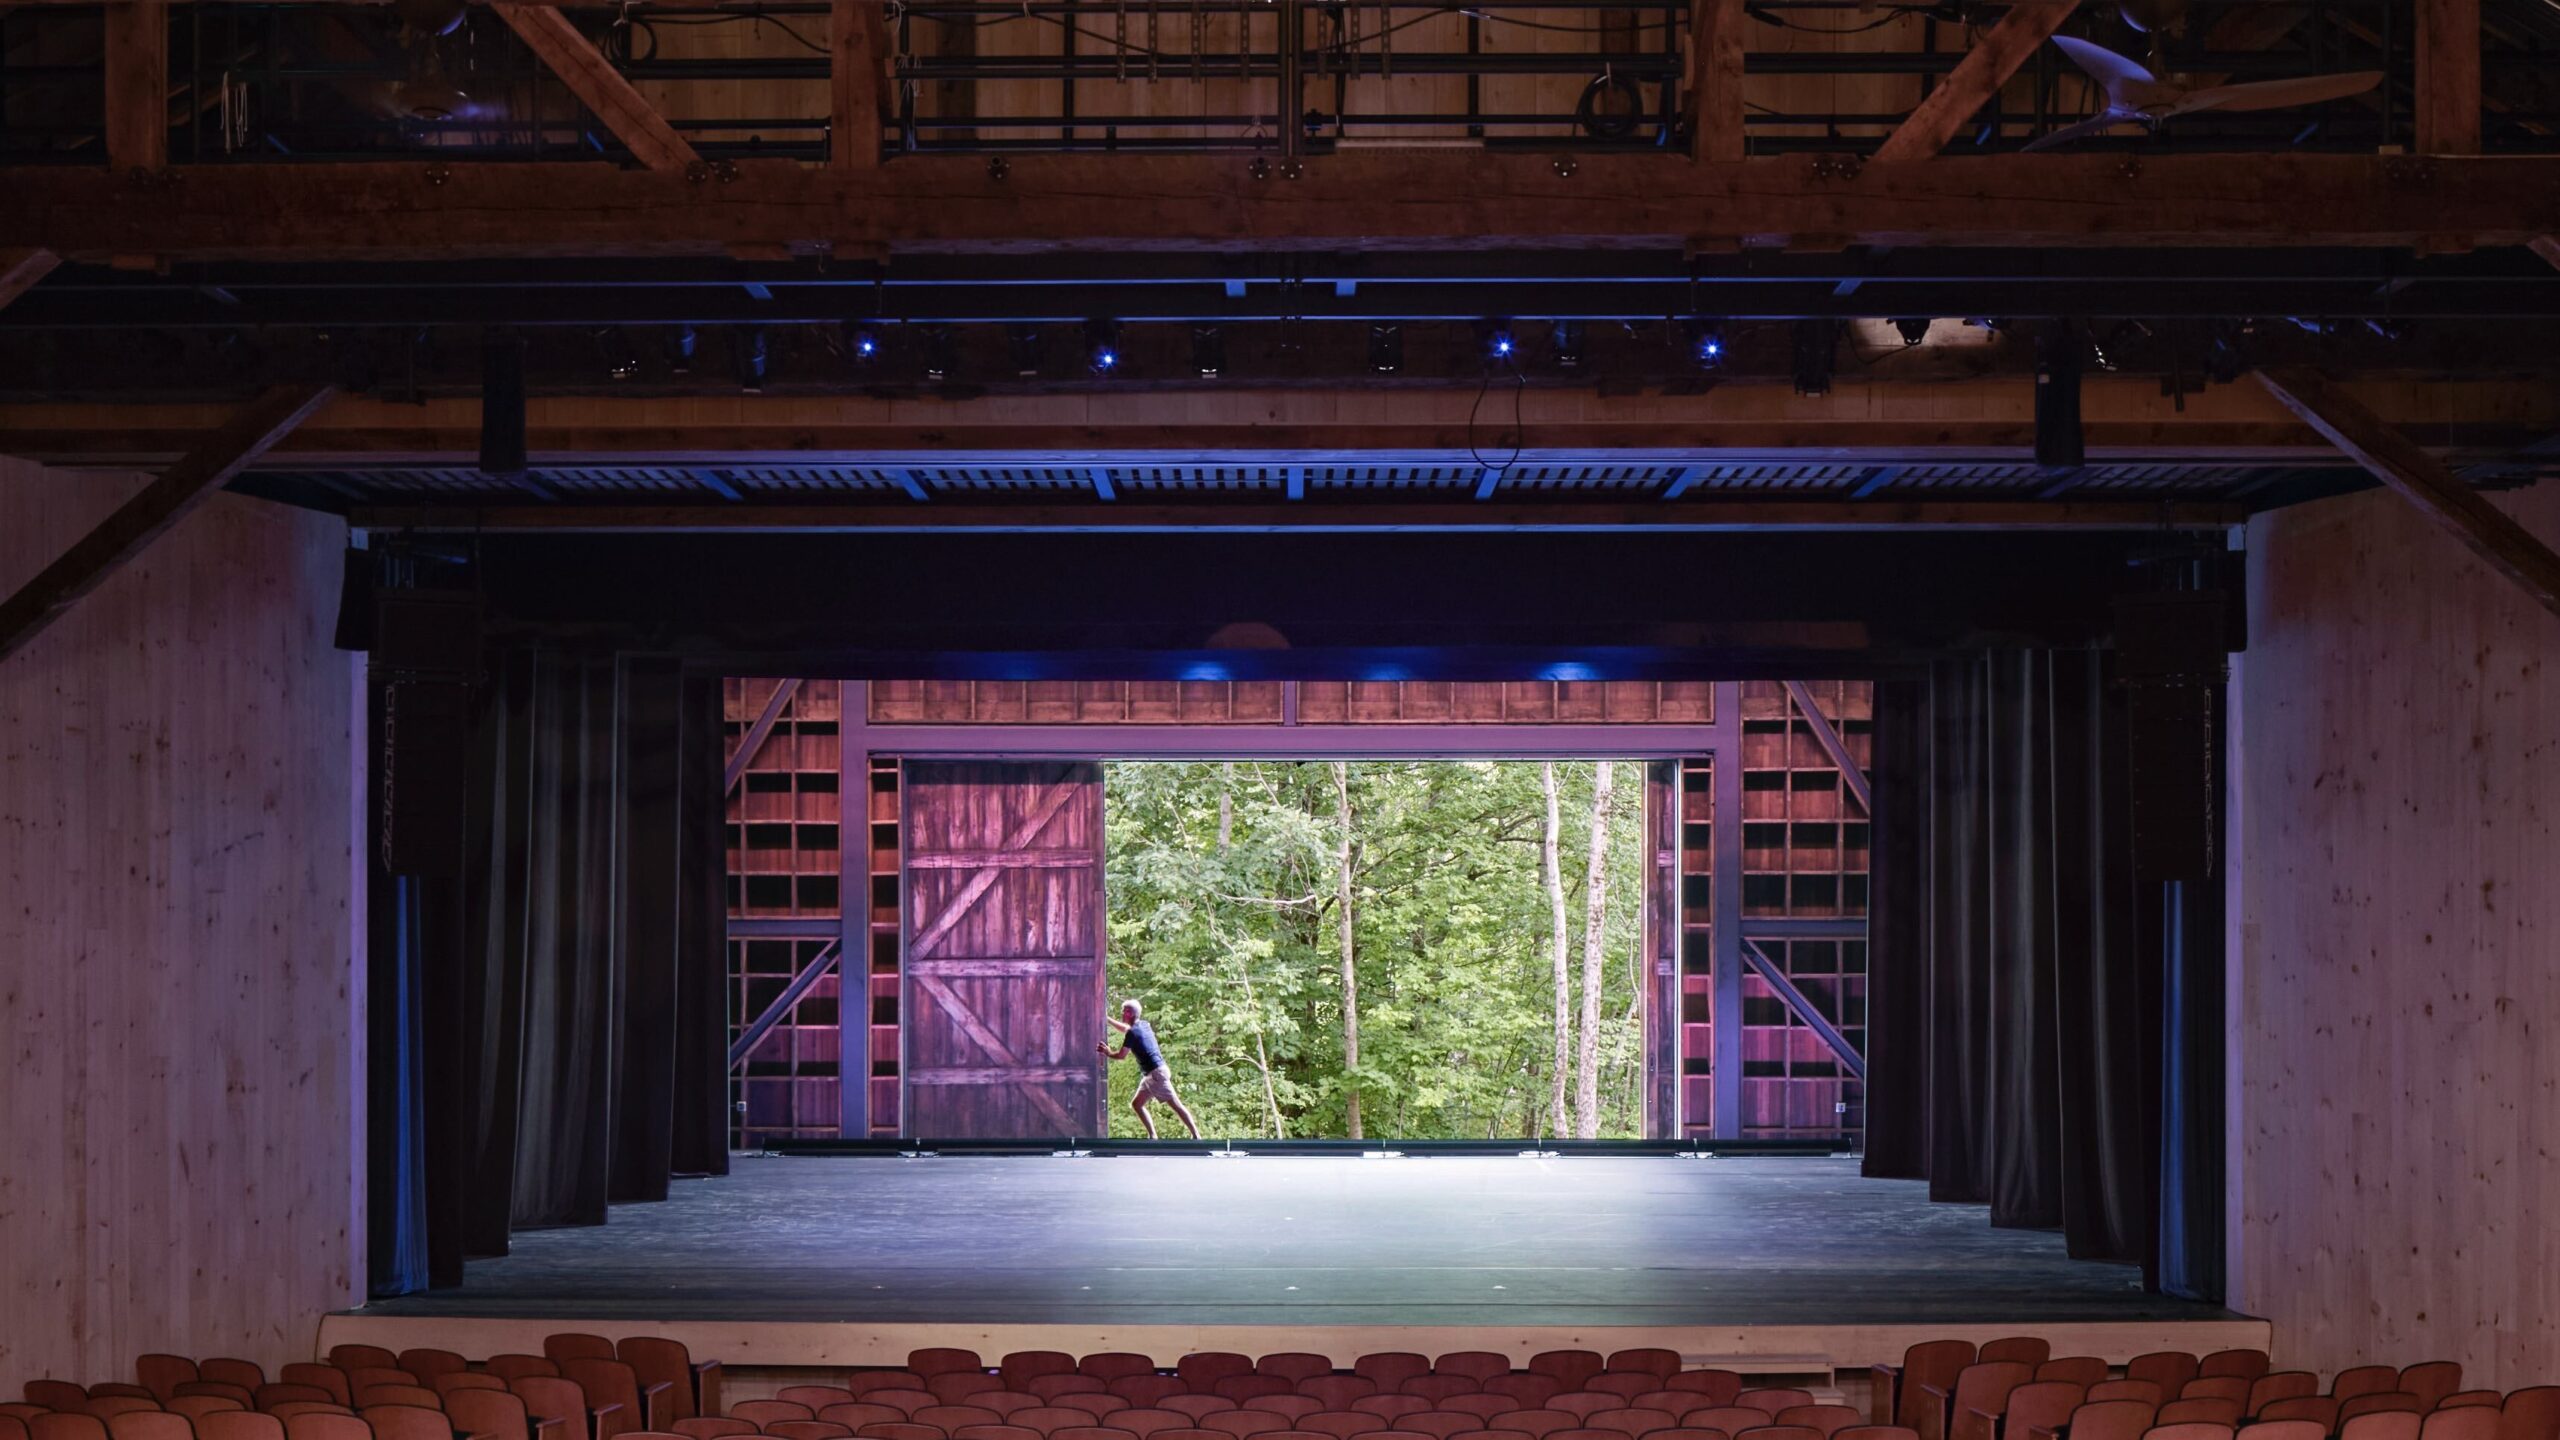 A person pushes open the barn door of the Ted Shawn Theatre, revealing the forest behind the theatre.